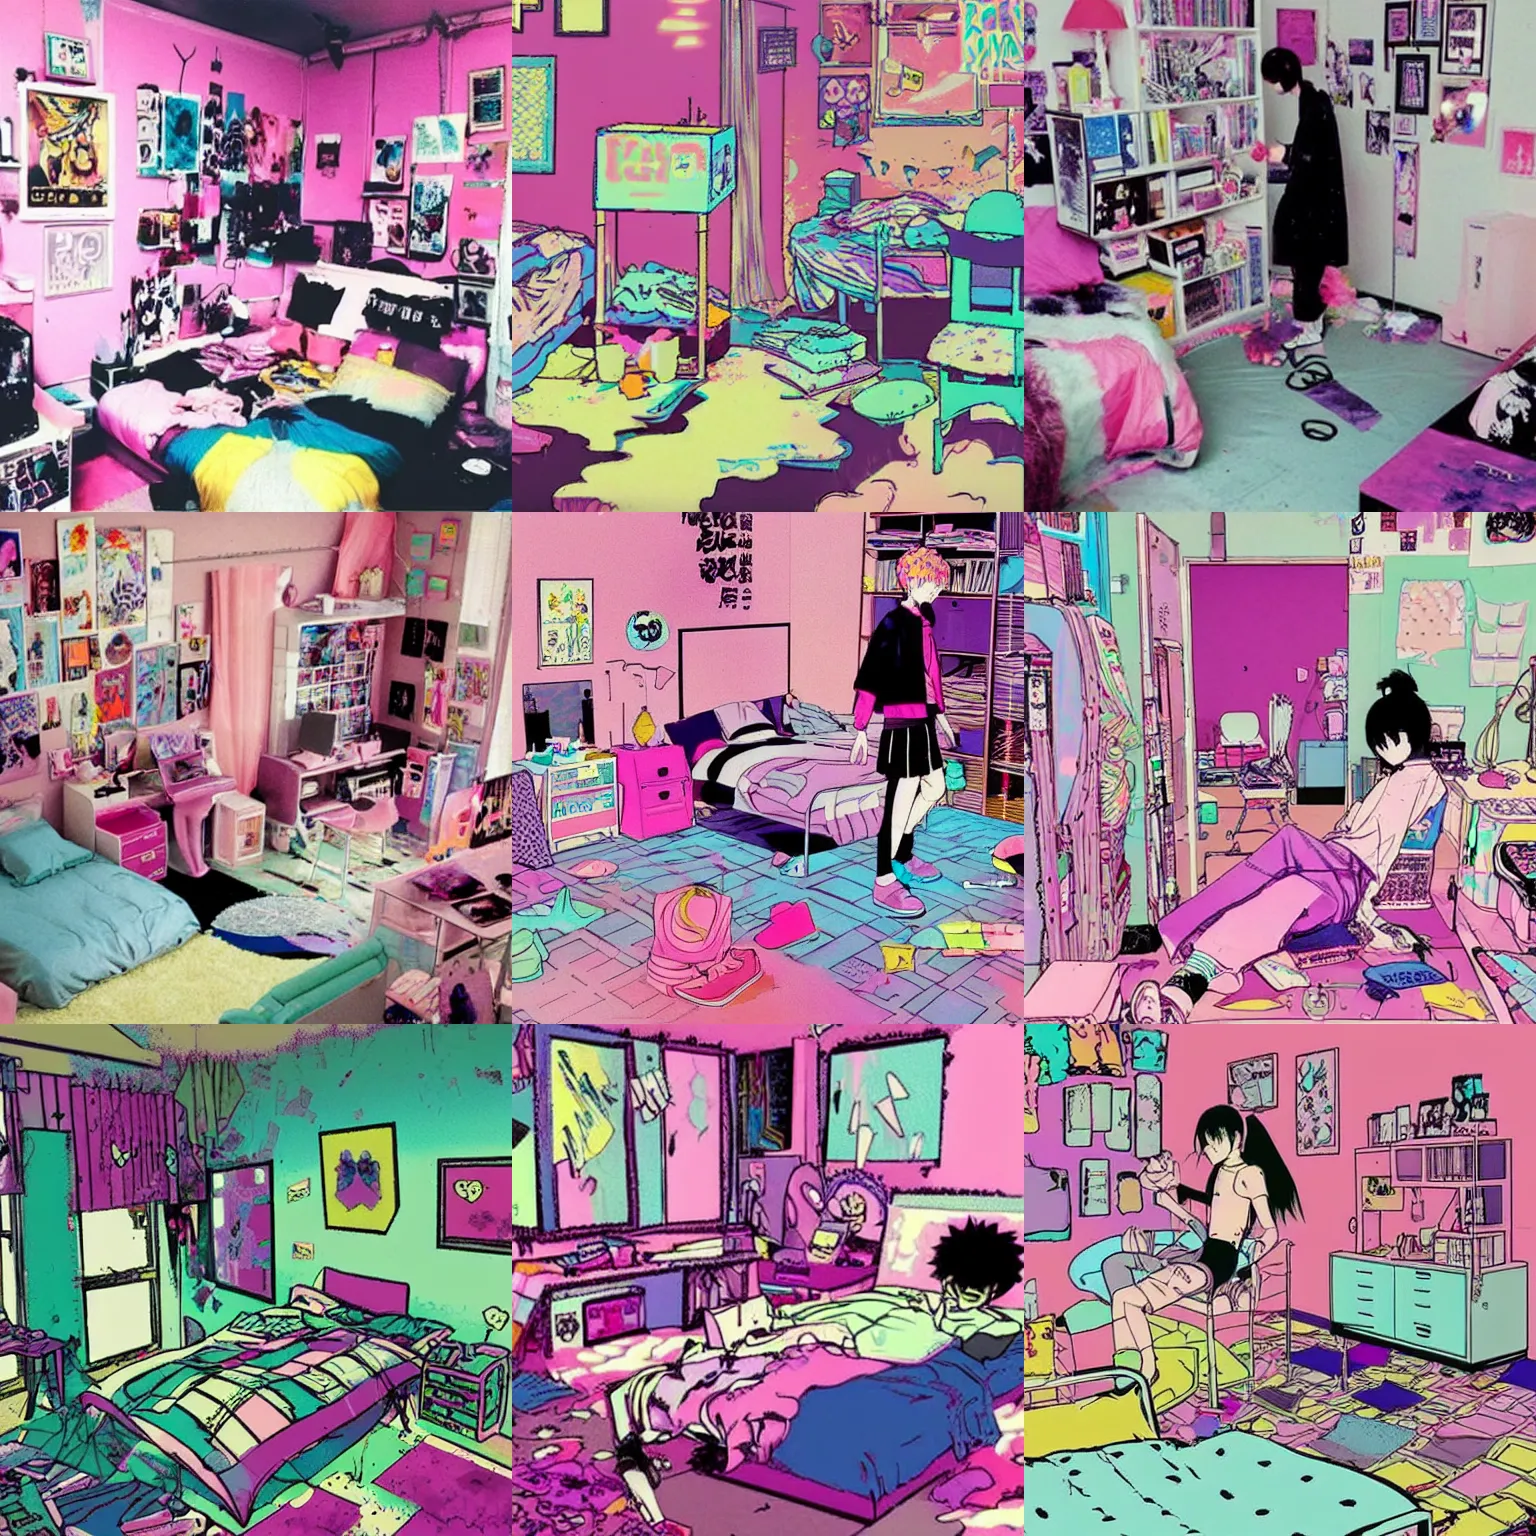 Prompt: 9 0 s, pastel goth aesthetic, messy room, vaporwave colors, by asano and hirohiko araki